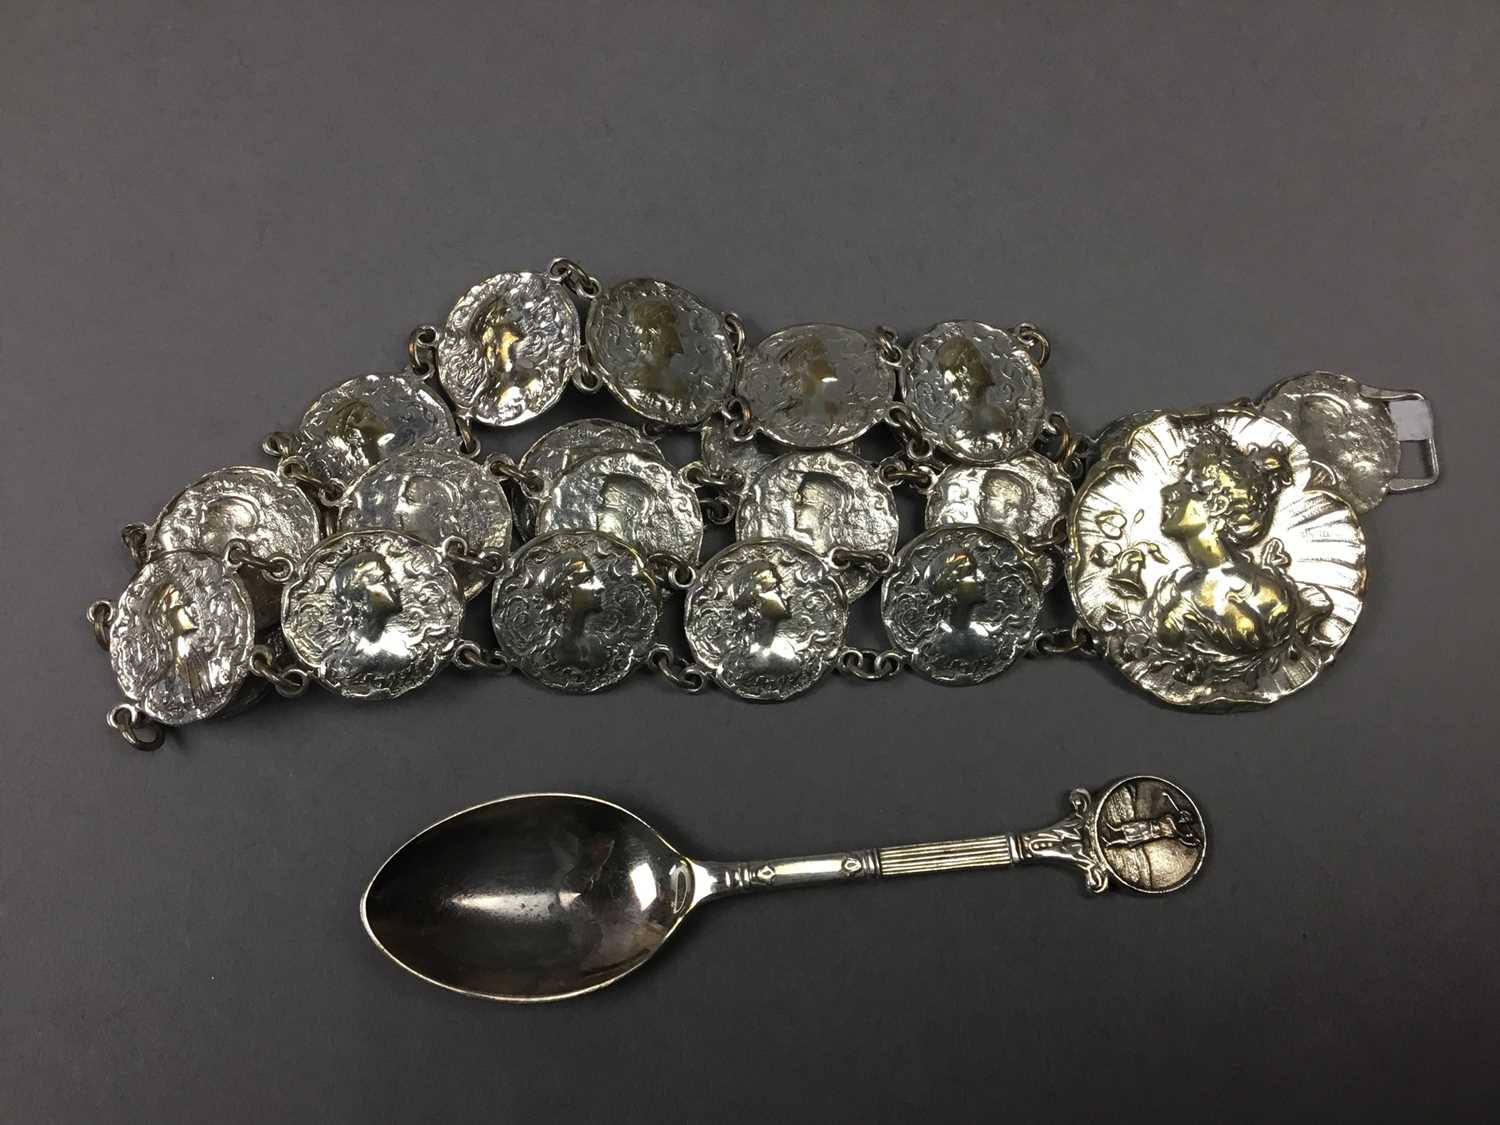 A SILVER BROOCH DEPICTING REYNOLD'S ANGELS, ALONG WITH PLATED BELT AND SPOON - Image 2 of 2